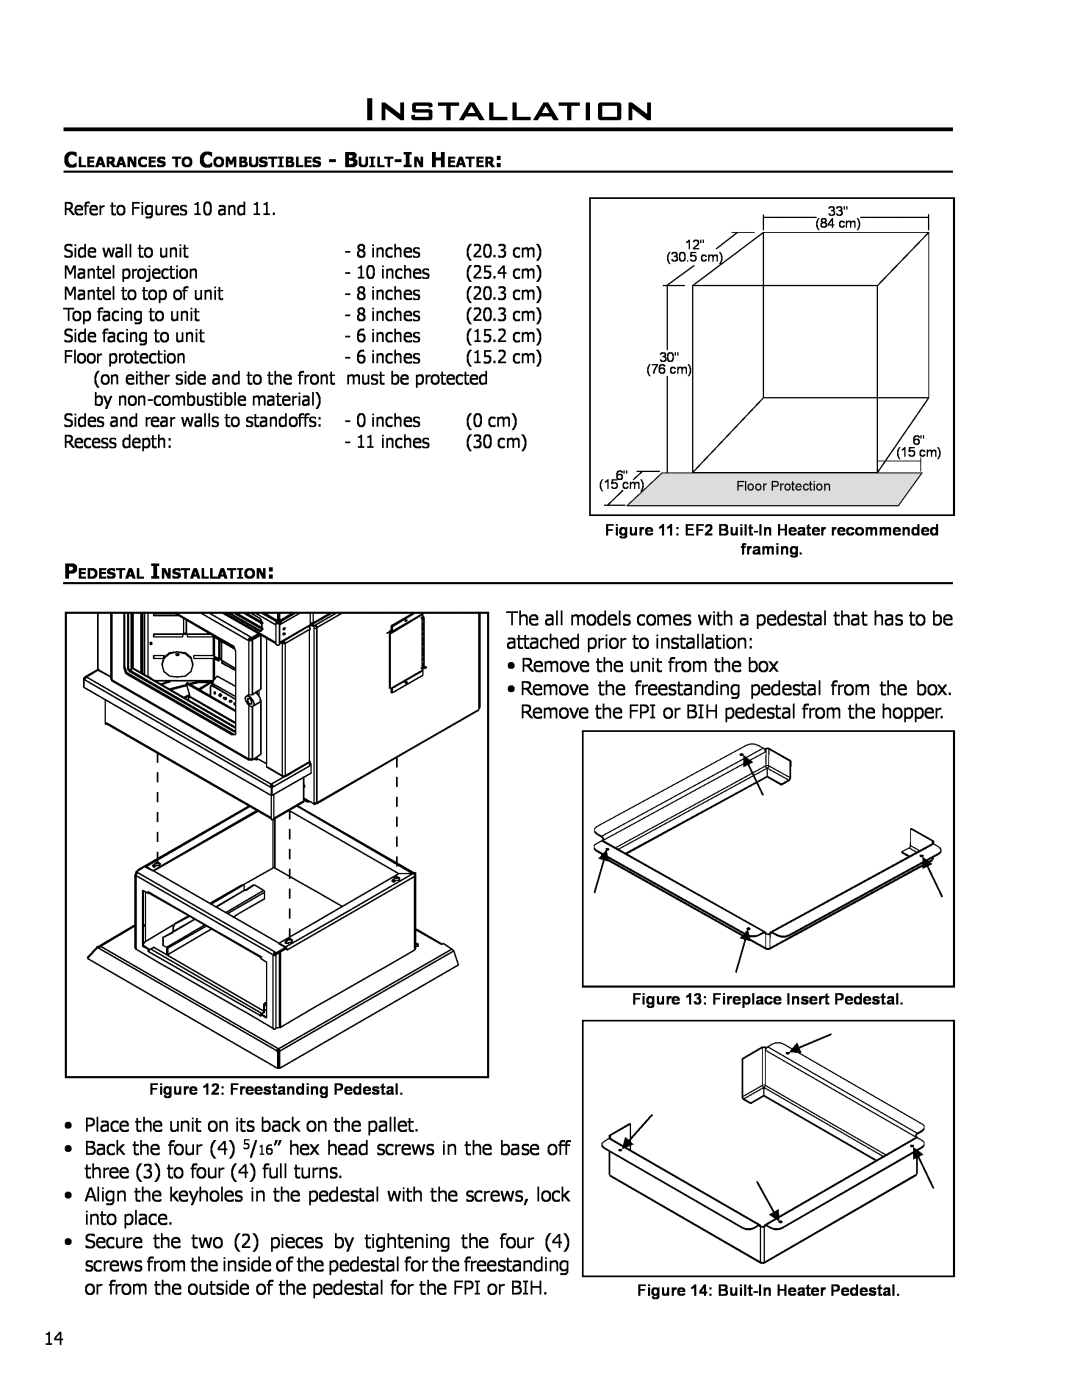 Enviro EF-119 owner manual Installation, or from the outside of the pedestal for the FPI or BIH 